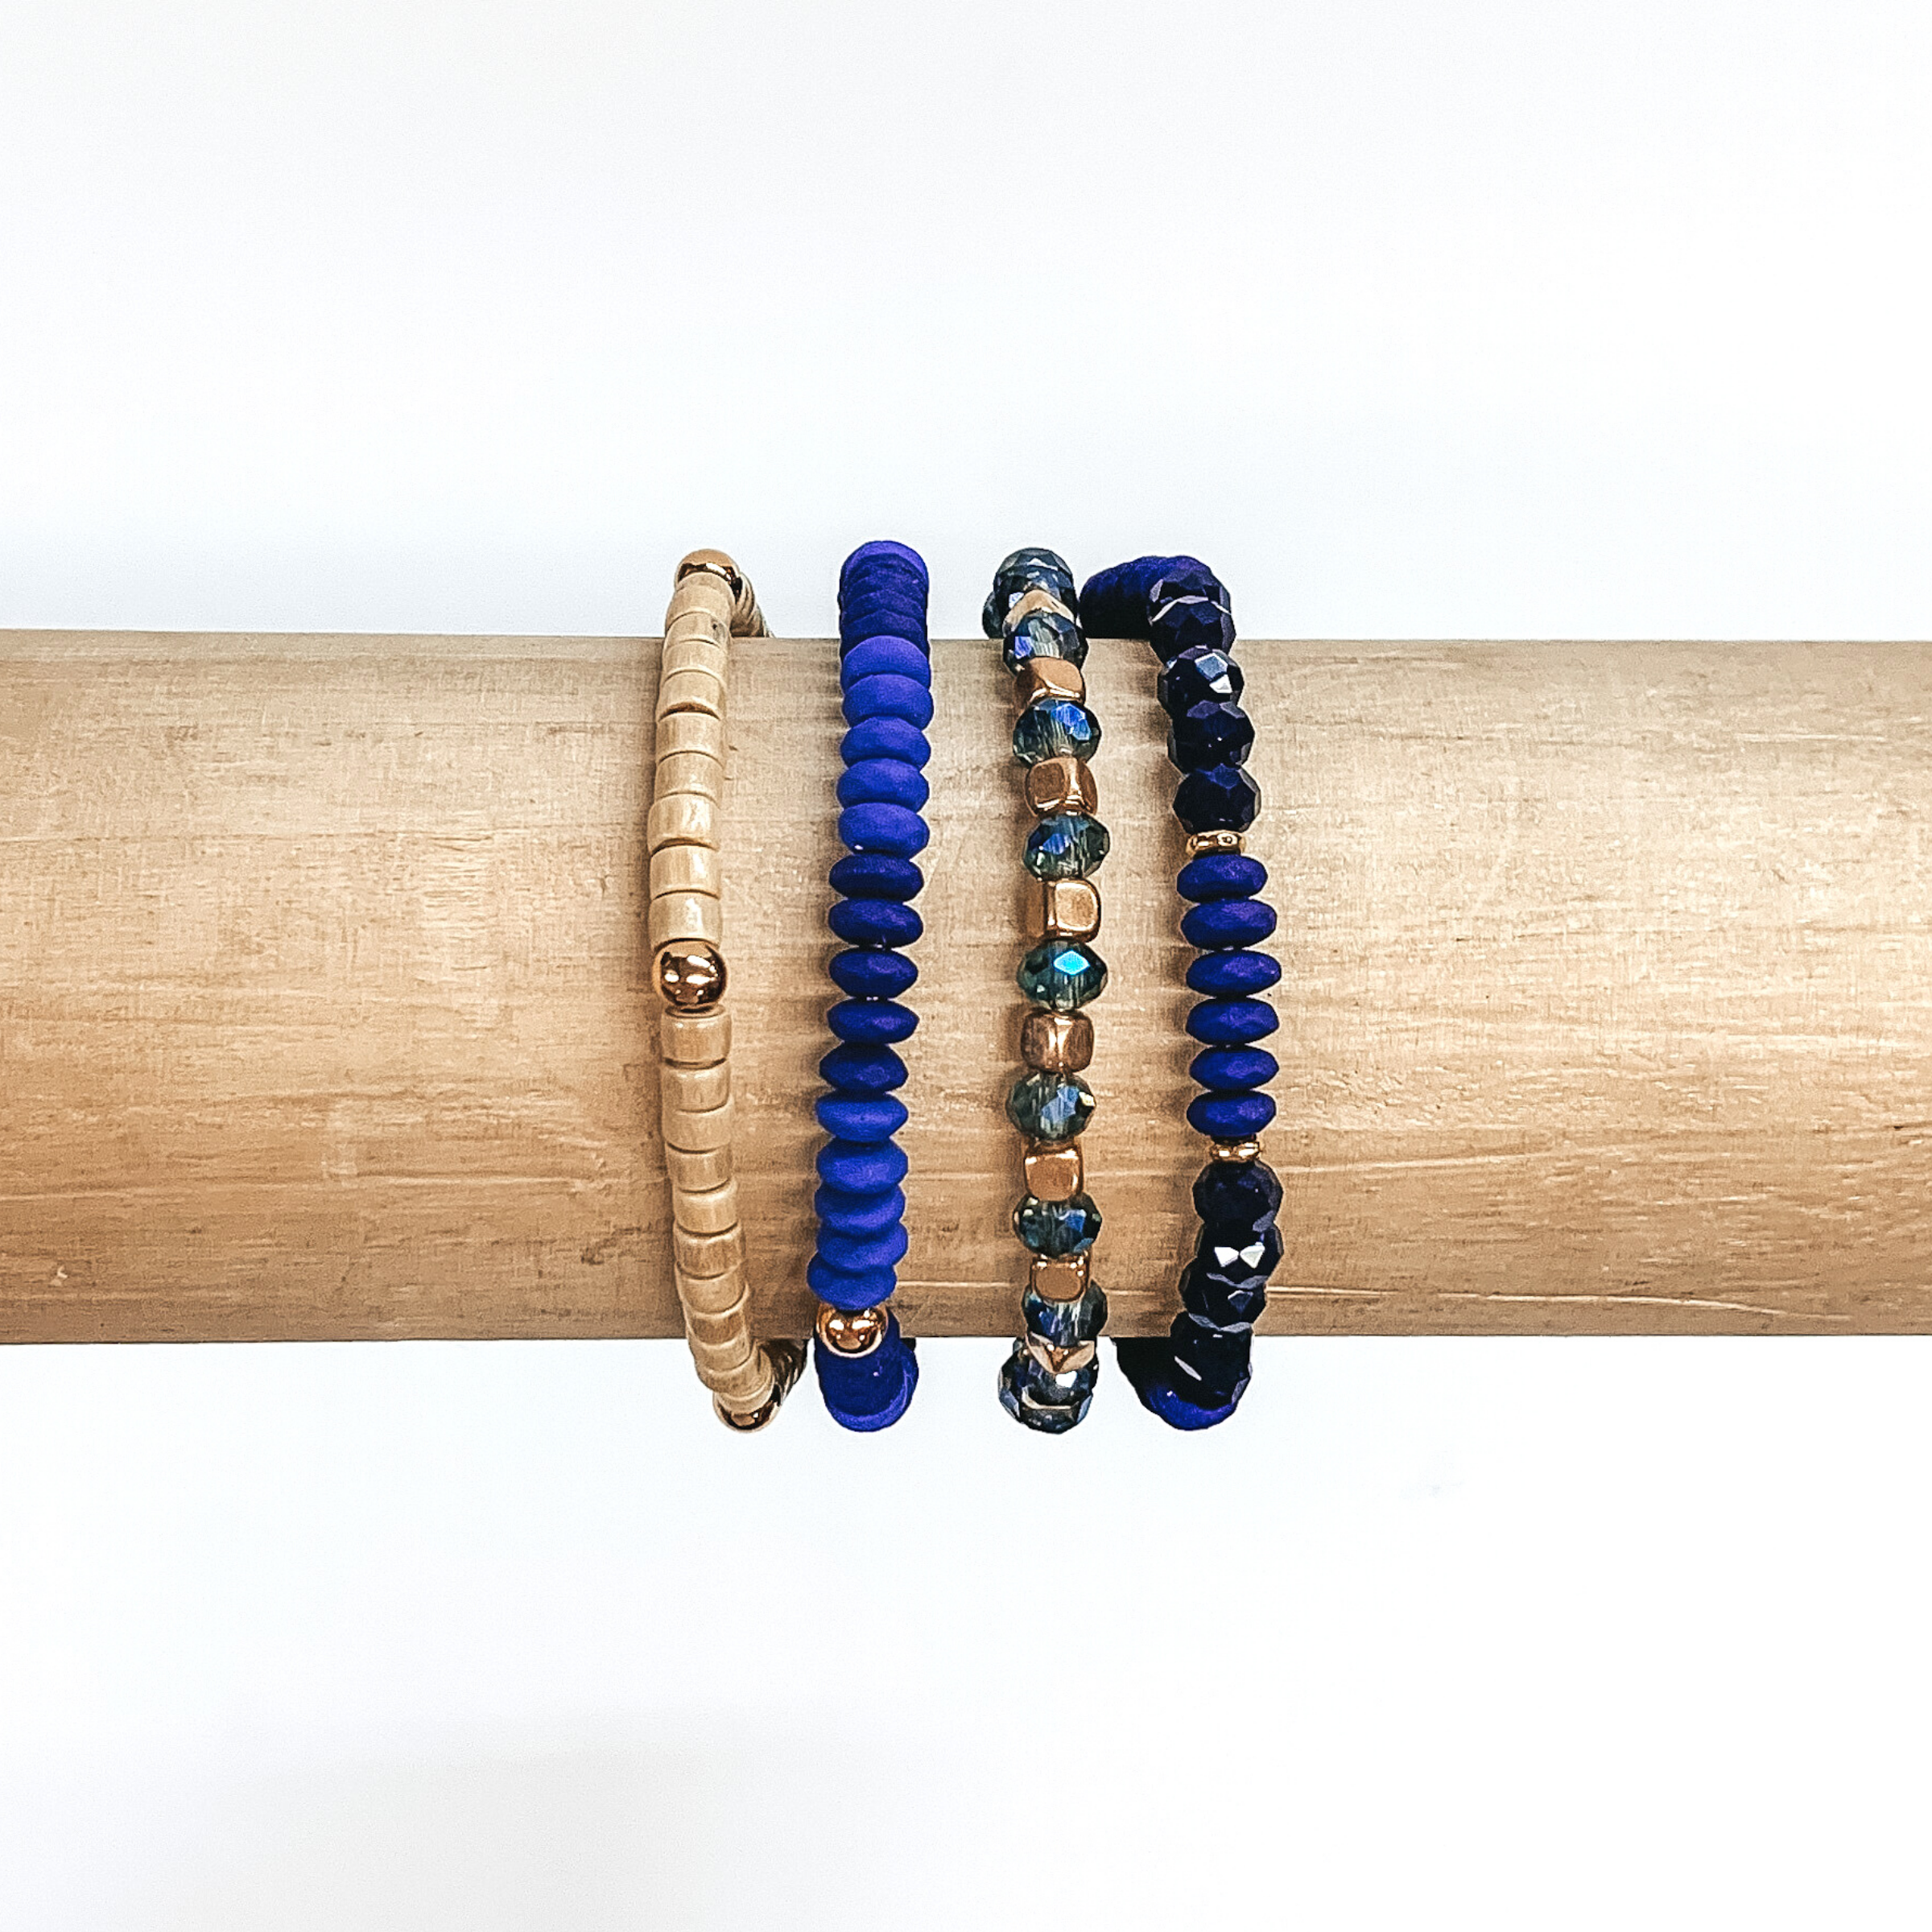 Beaded bracelet set with four different bracelets. Two of the bracelets include blue, navy, or cyrstal blue flat beads. One braclet has wood colored beads with gold spacers. The last bracelet has blue crystal beads with gold spacers. These bracelets are pictured on a wood bracelet holder on a white background.